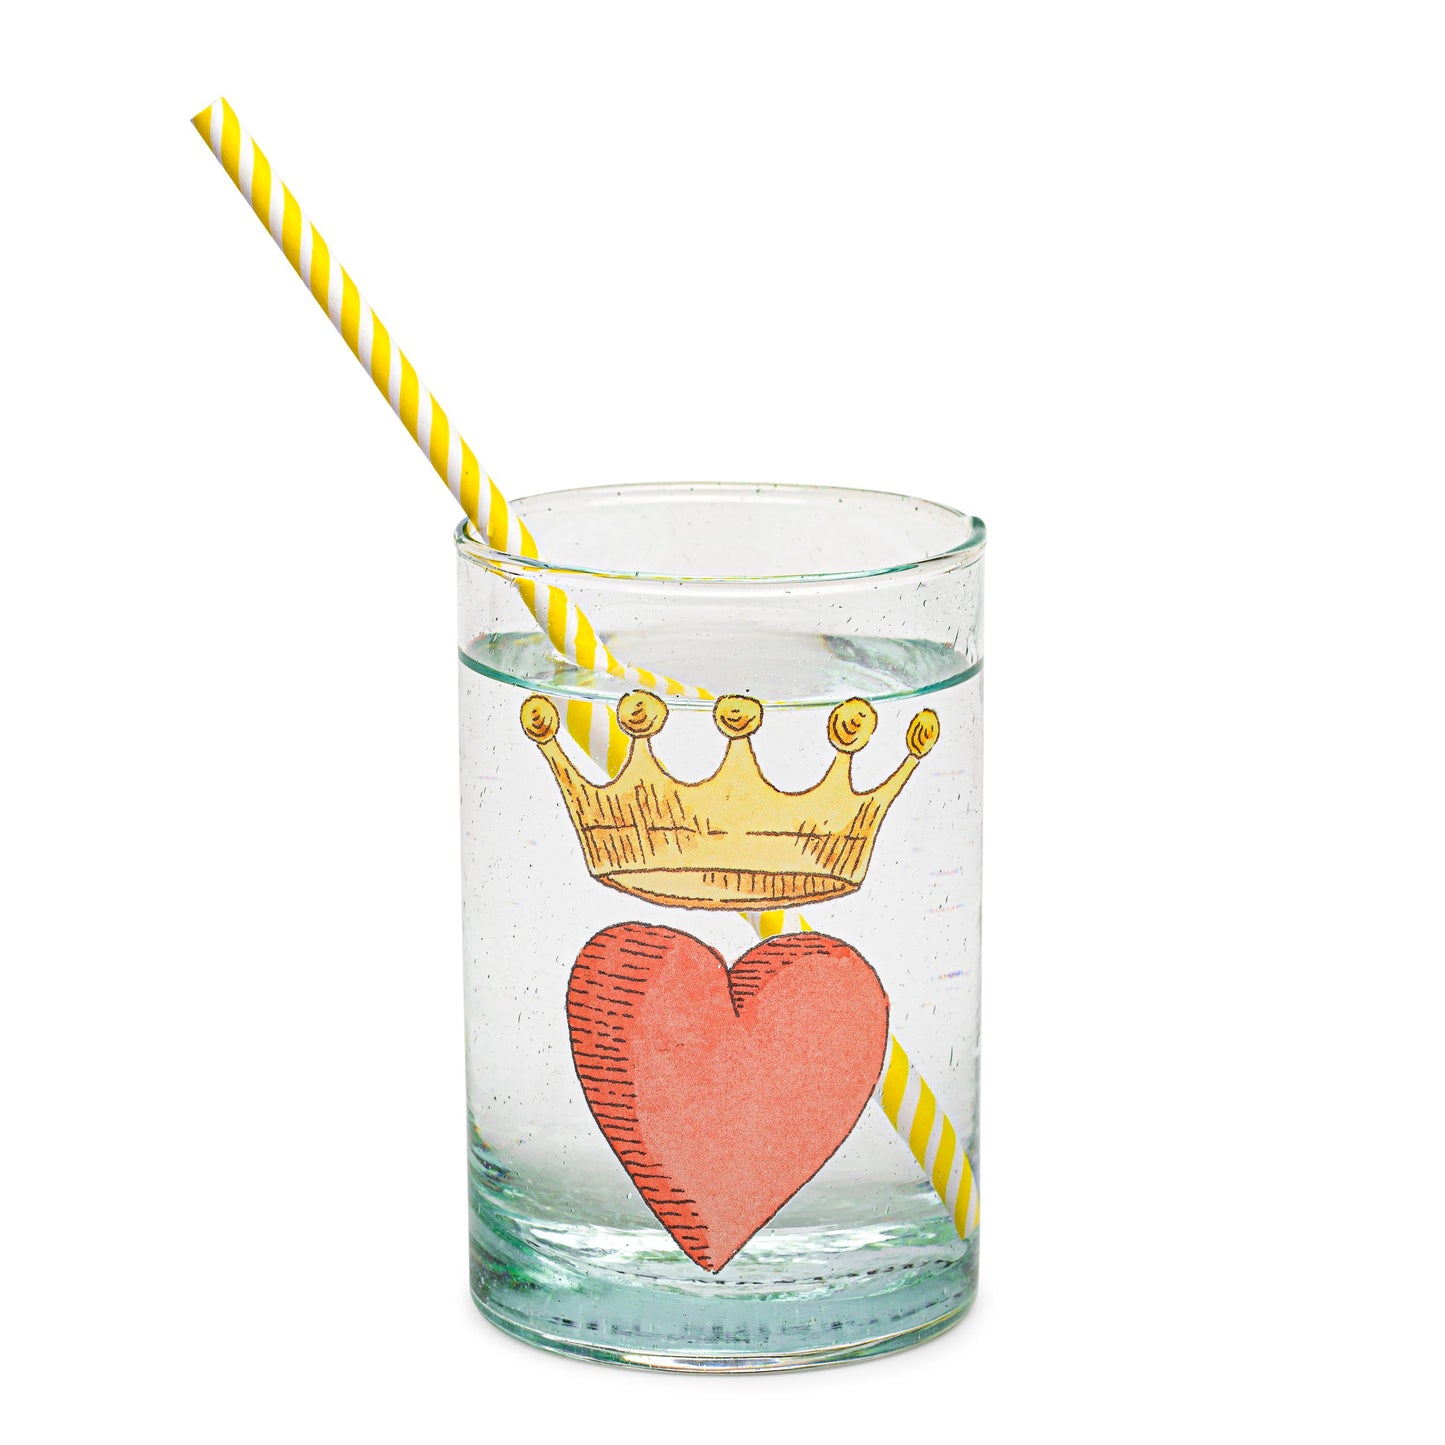 Illustrated glass | CROWNED HEART